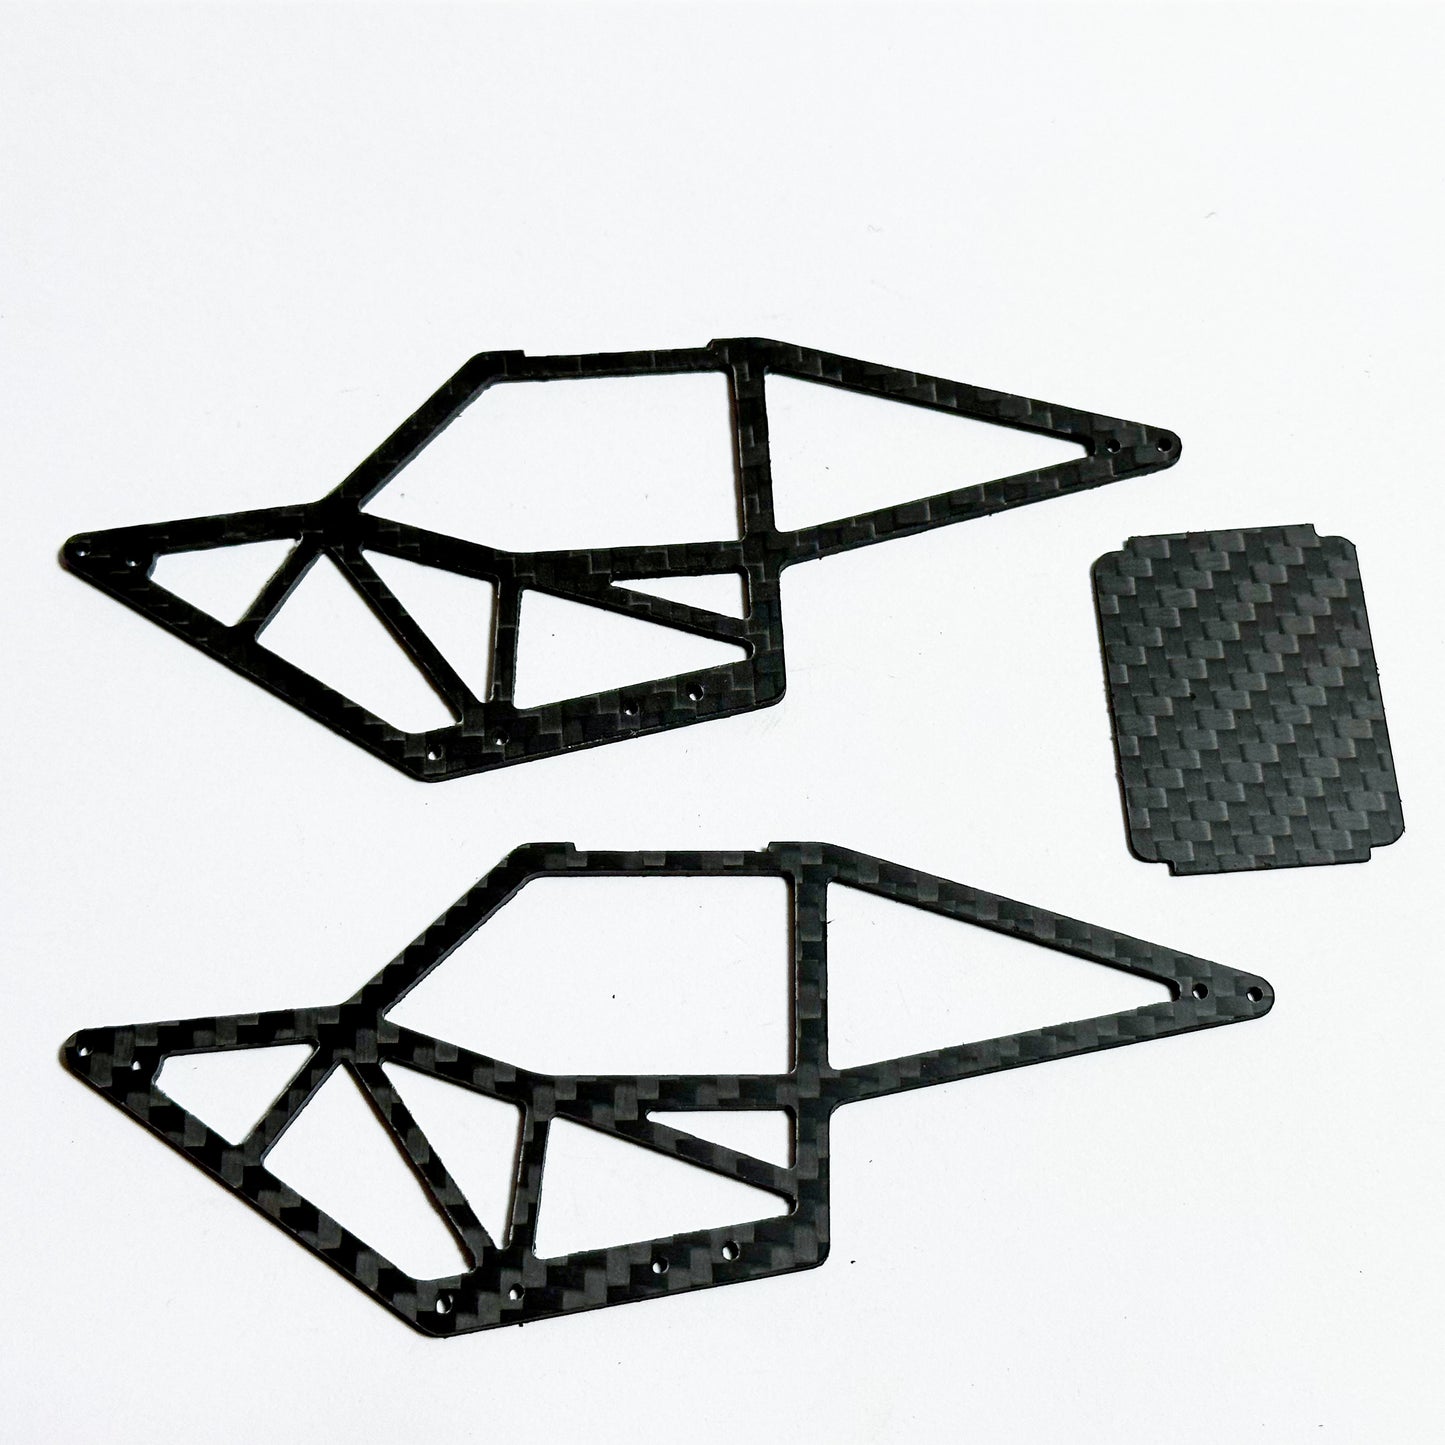 U.ROCK Buggy (SCX24 Competition Chassis)